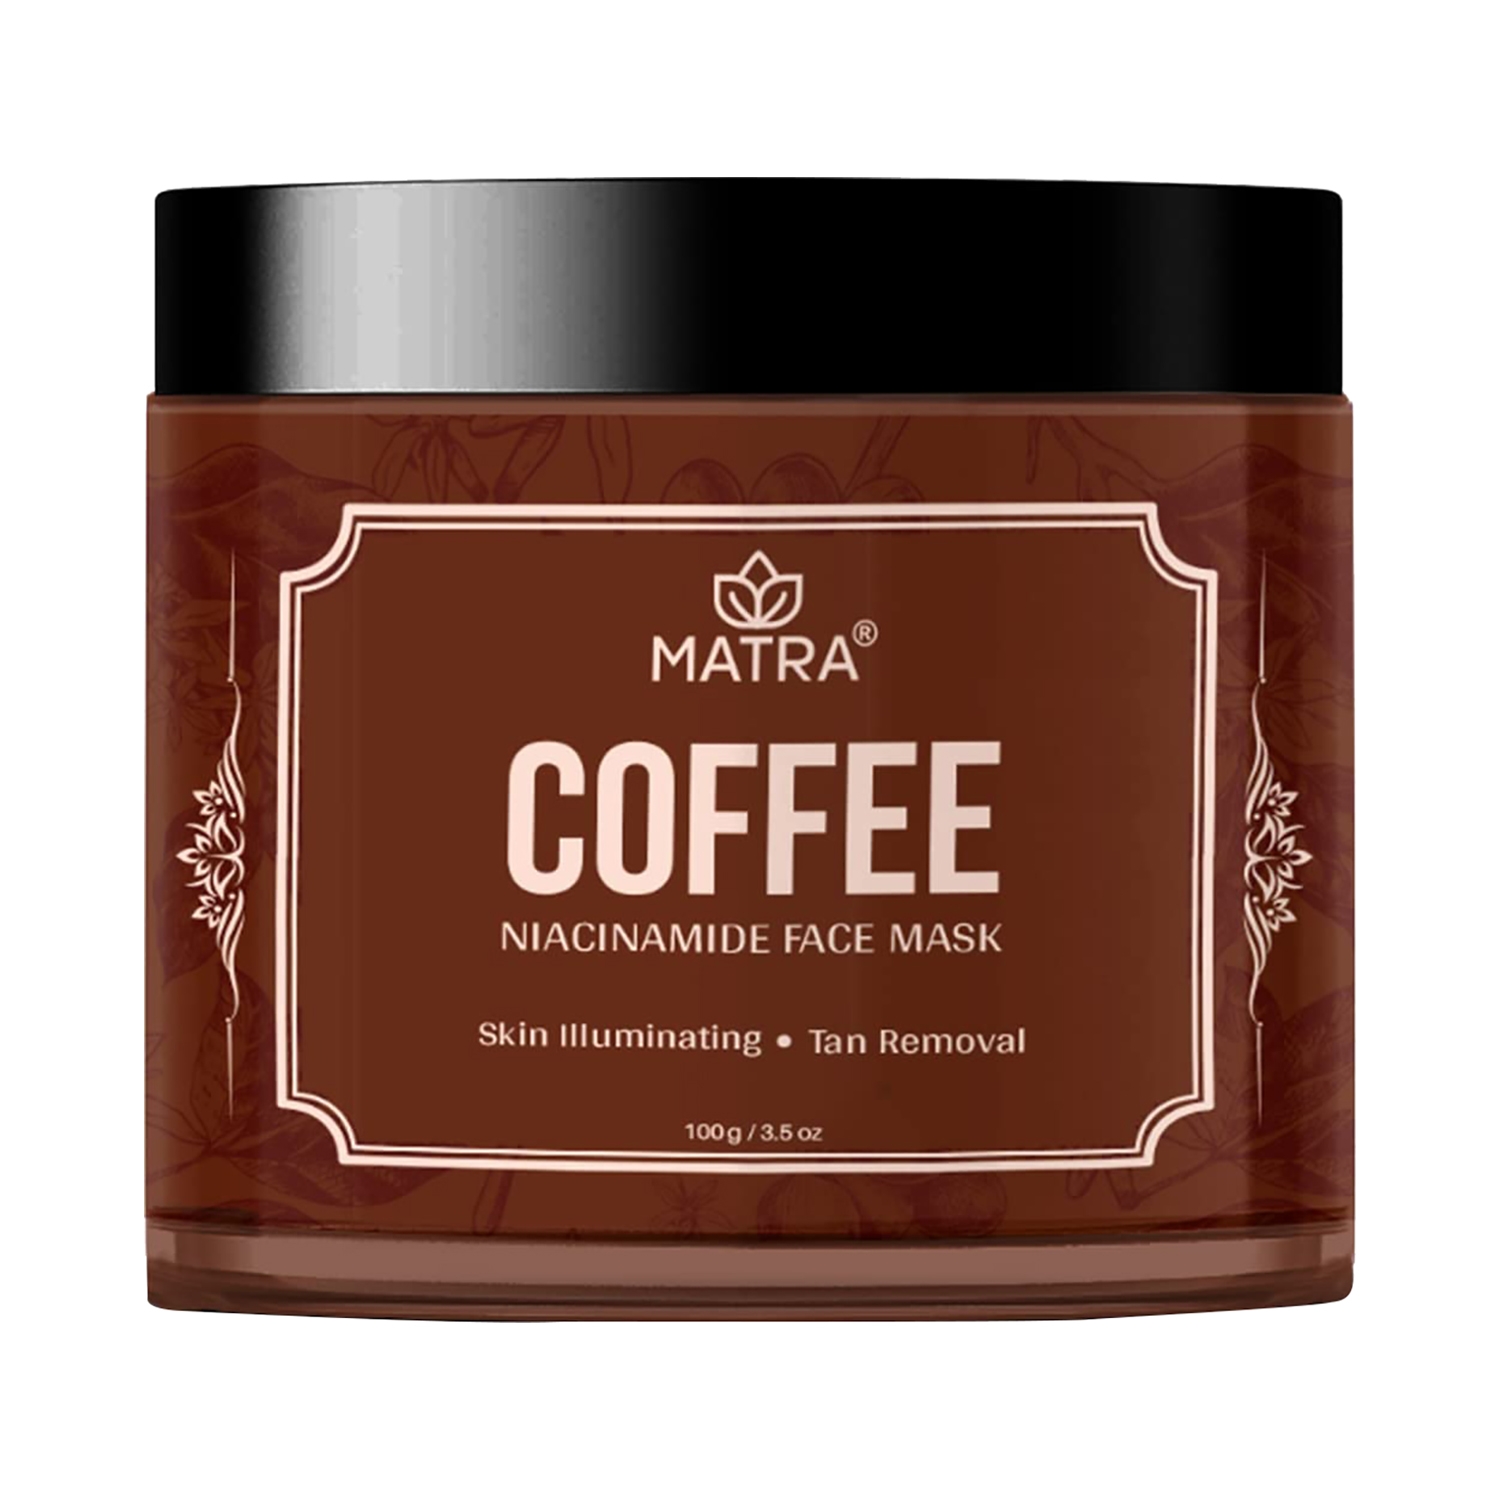 Matra Coffee Face Mask with Niacinamide (100g)